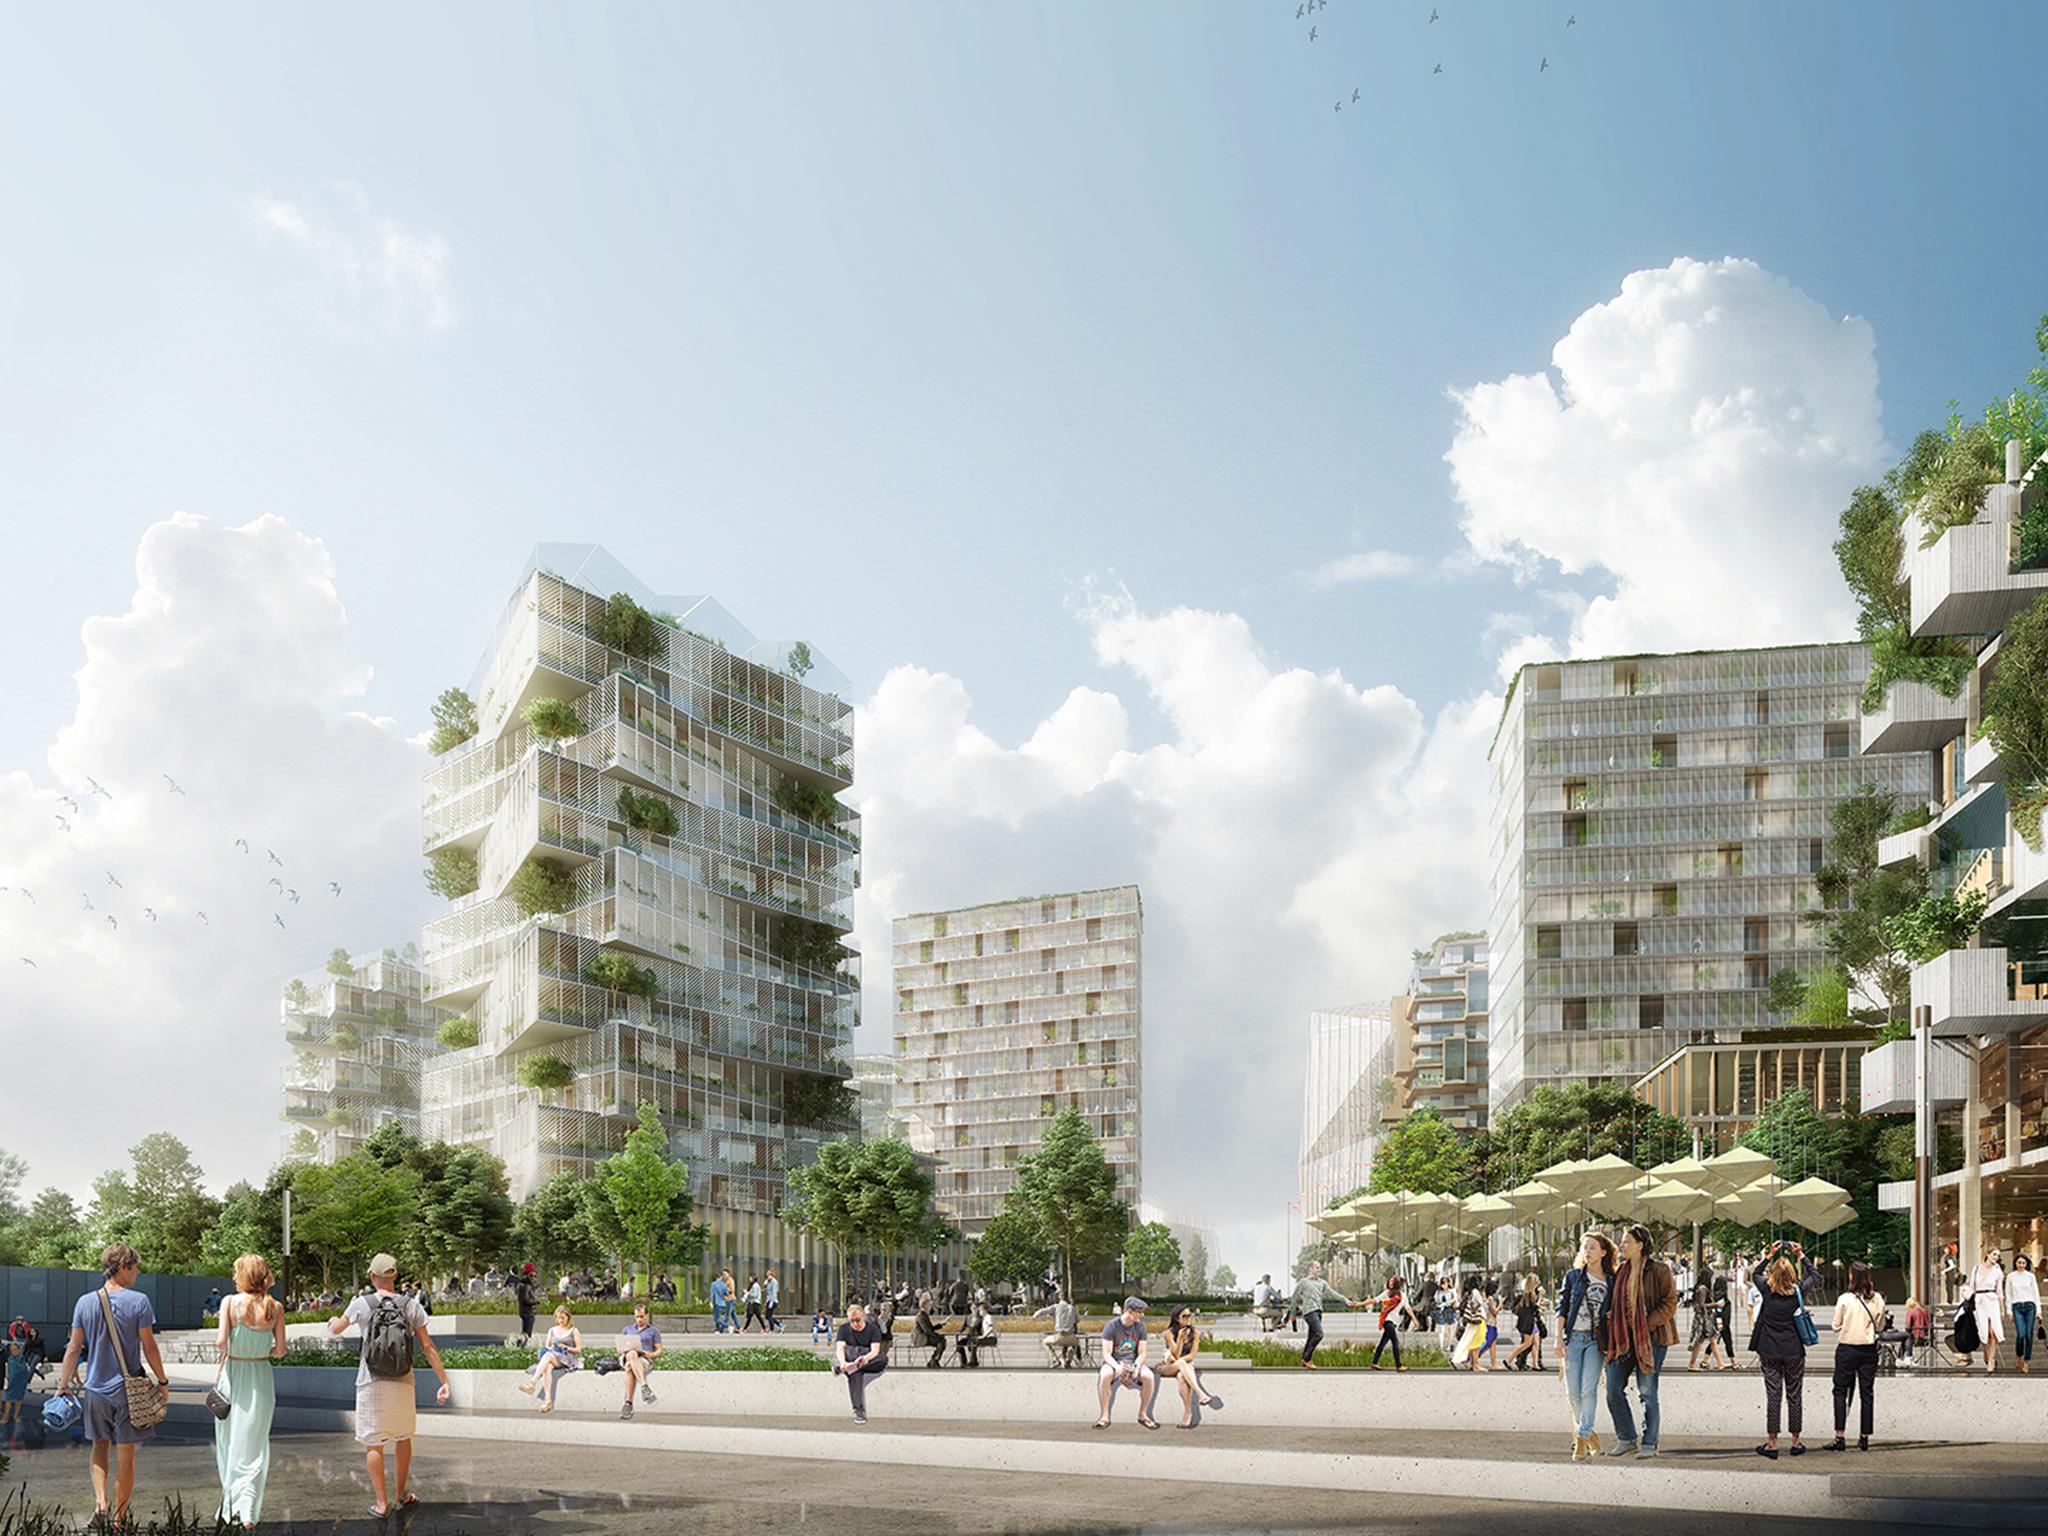 Plans for the Balcon Sur Paris on the eastern edge of the city list 12 different tree-covered developments